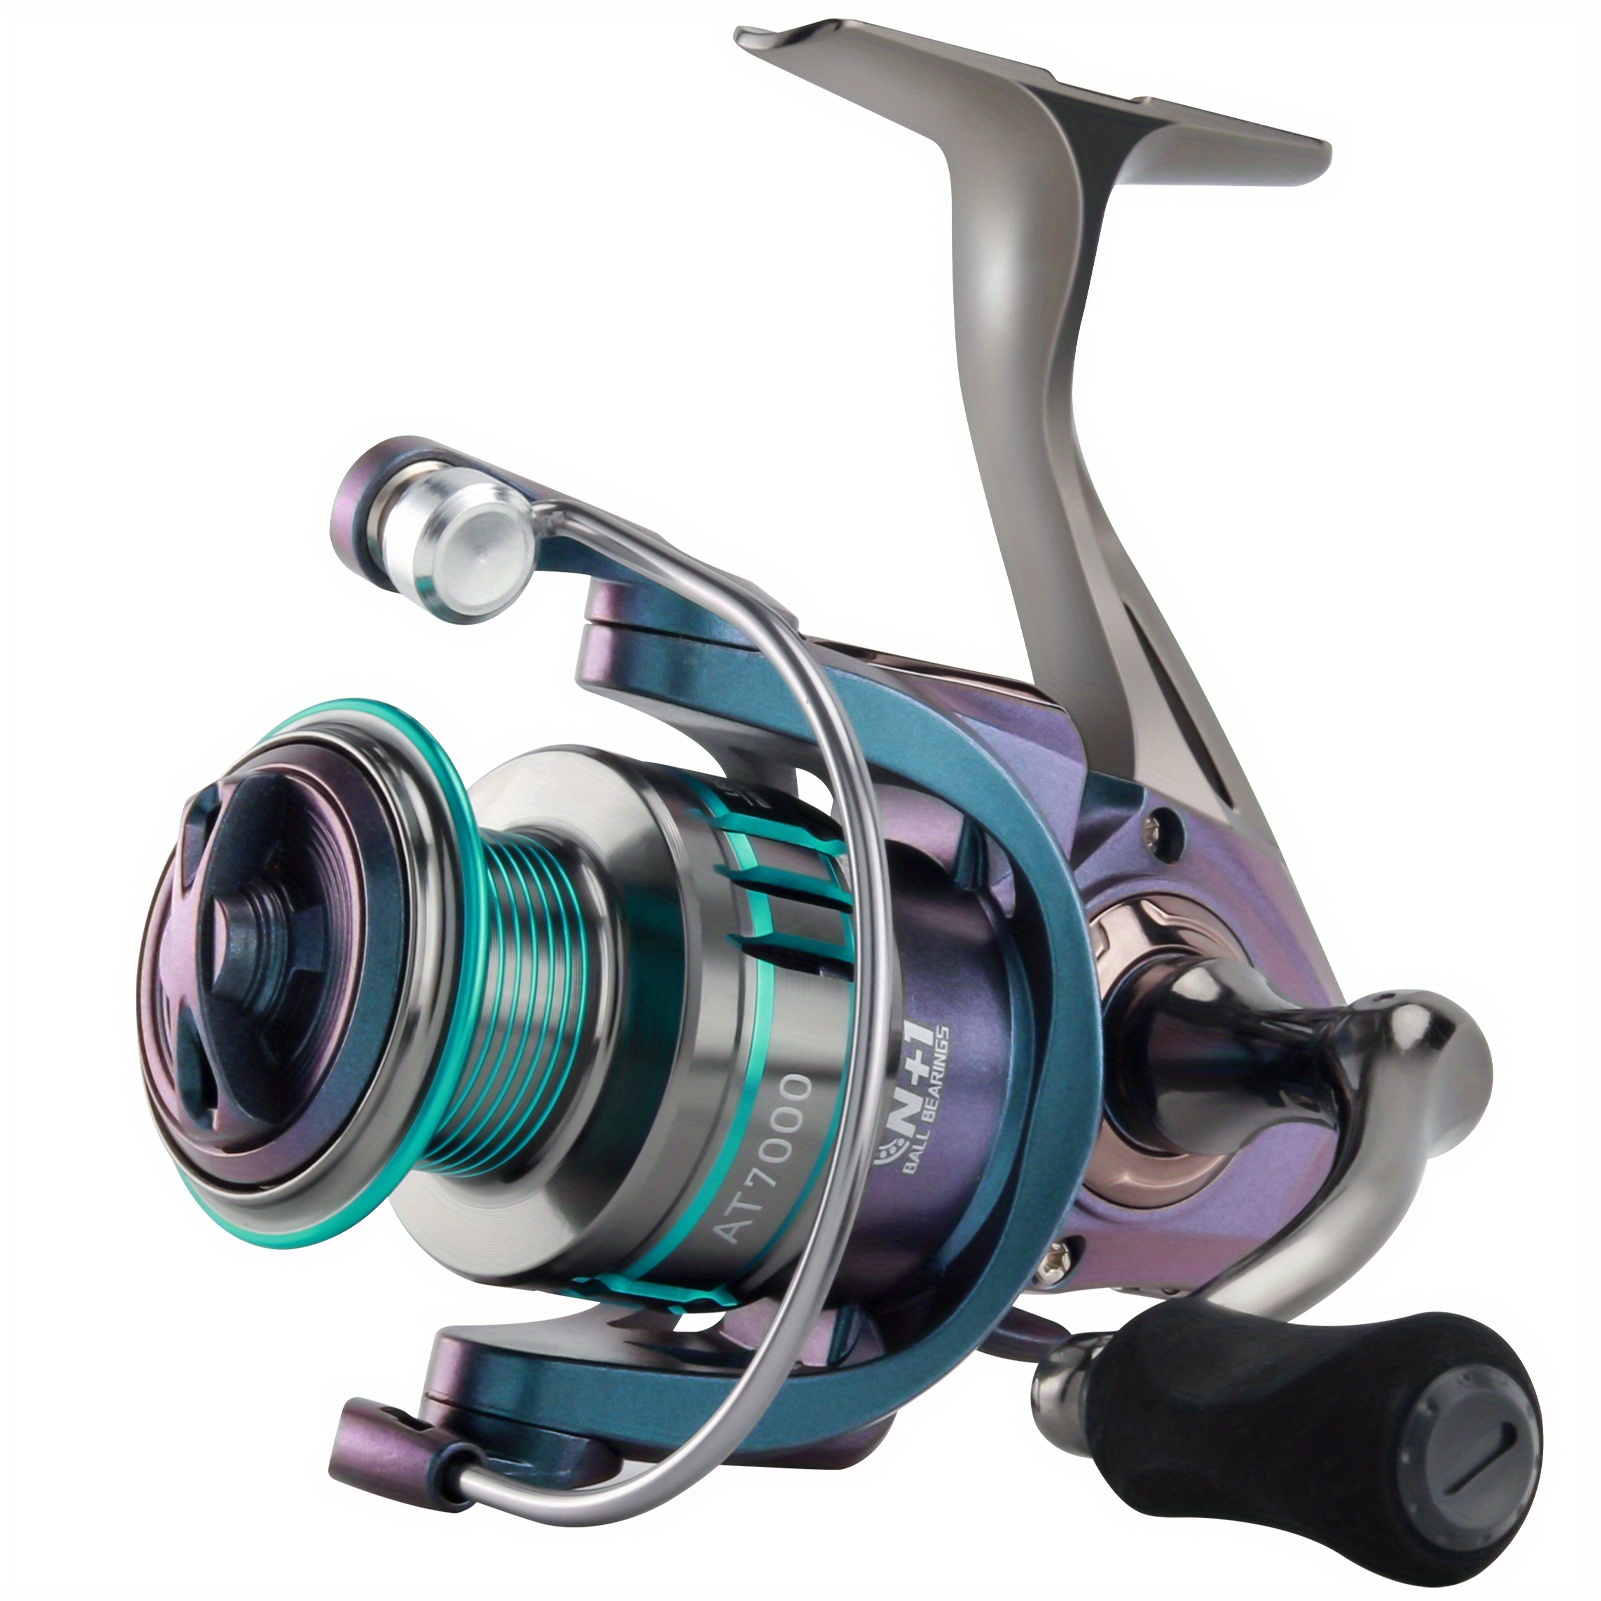 HAUT TON SLIVER WINDS SPINNING FISHING REEL,13 BB, 5.2:1Gear Ratio,  1.81-6.35KG Max Drag, Ultra Light, Include Blance Bar